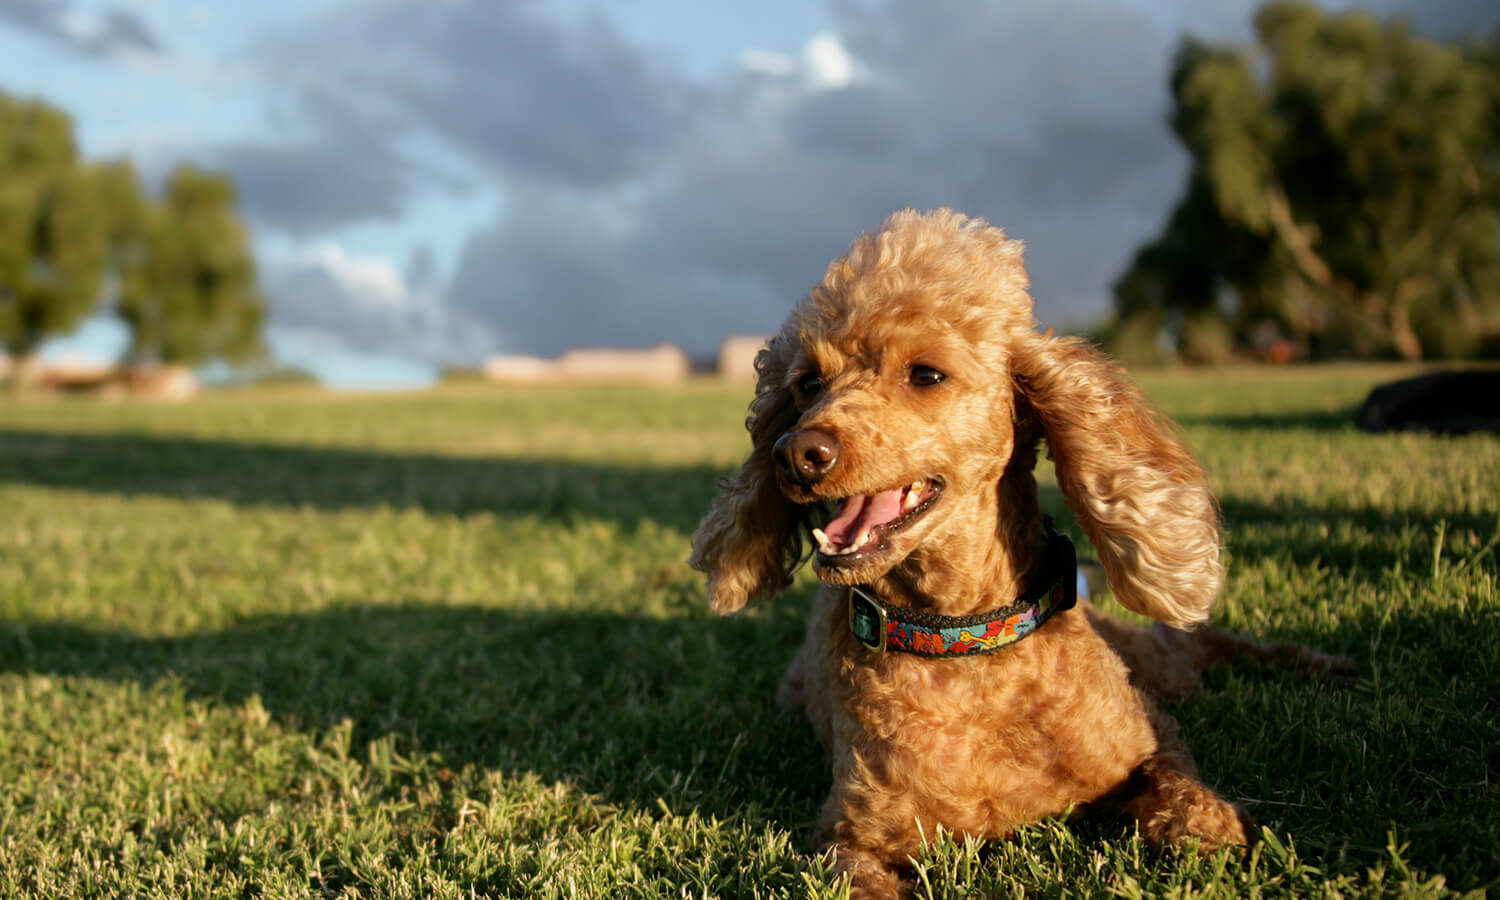 A poodle out in a lawn